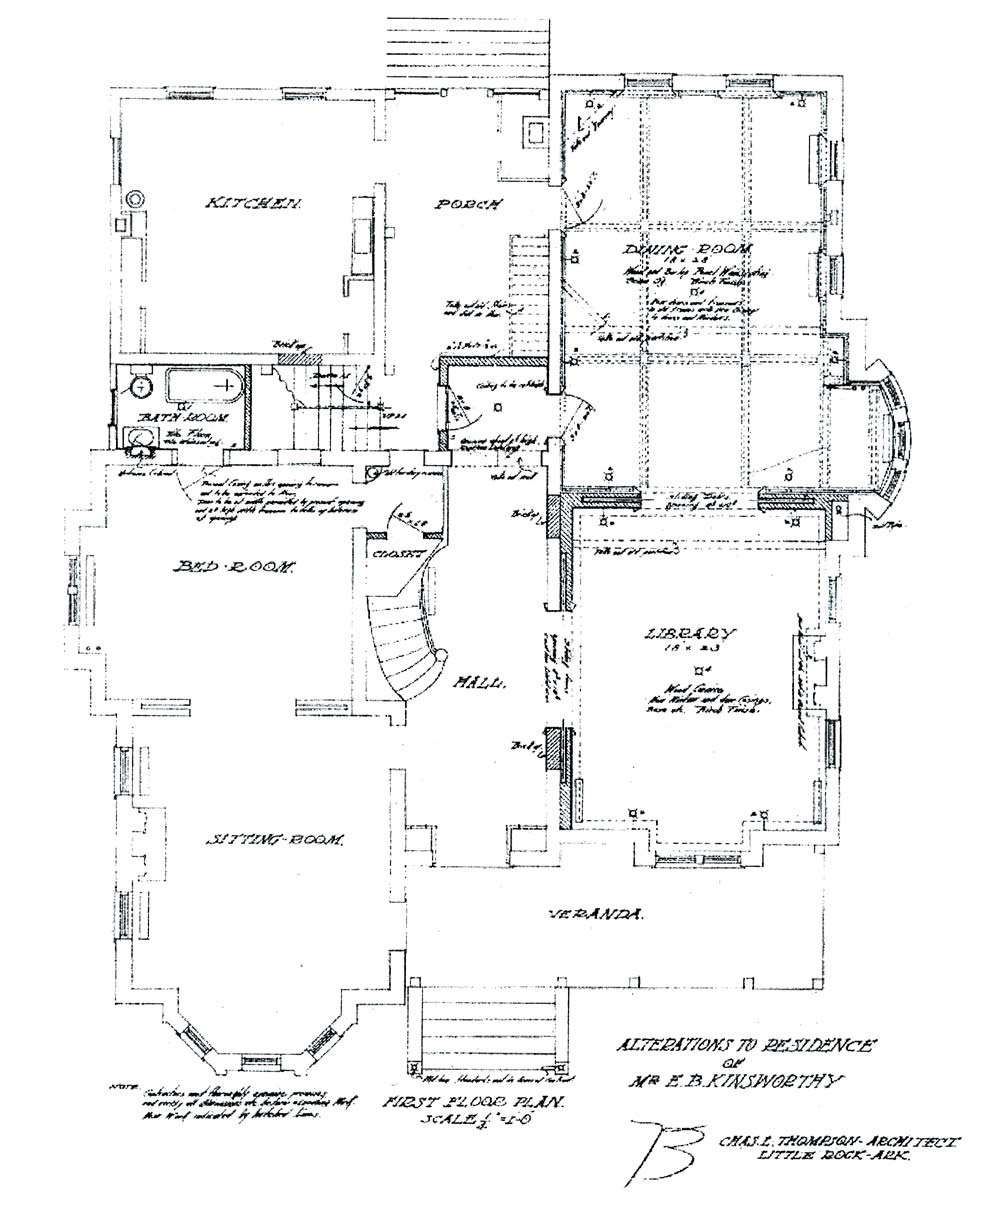 Floor plan showing "alterations to residence of Mr. E. B. Kinsworthy"